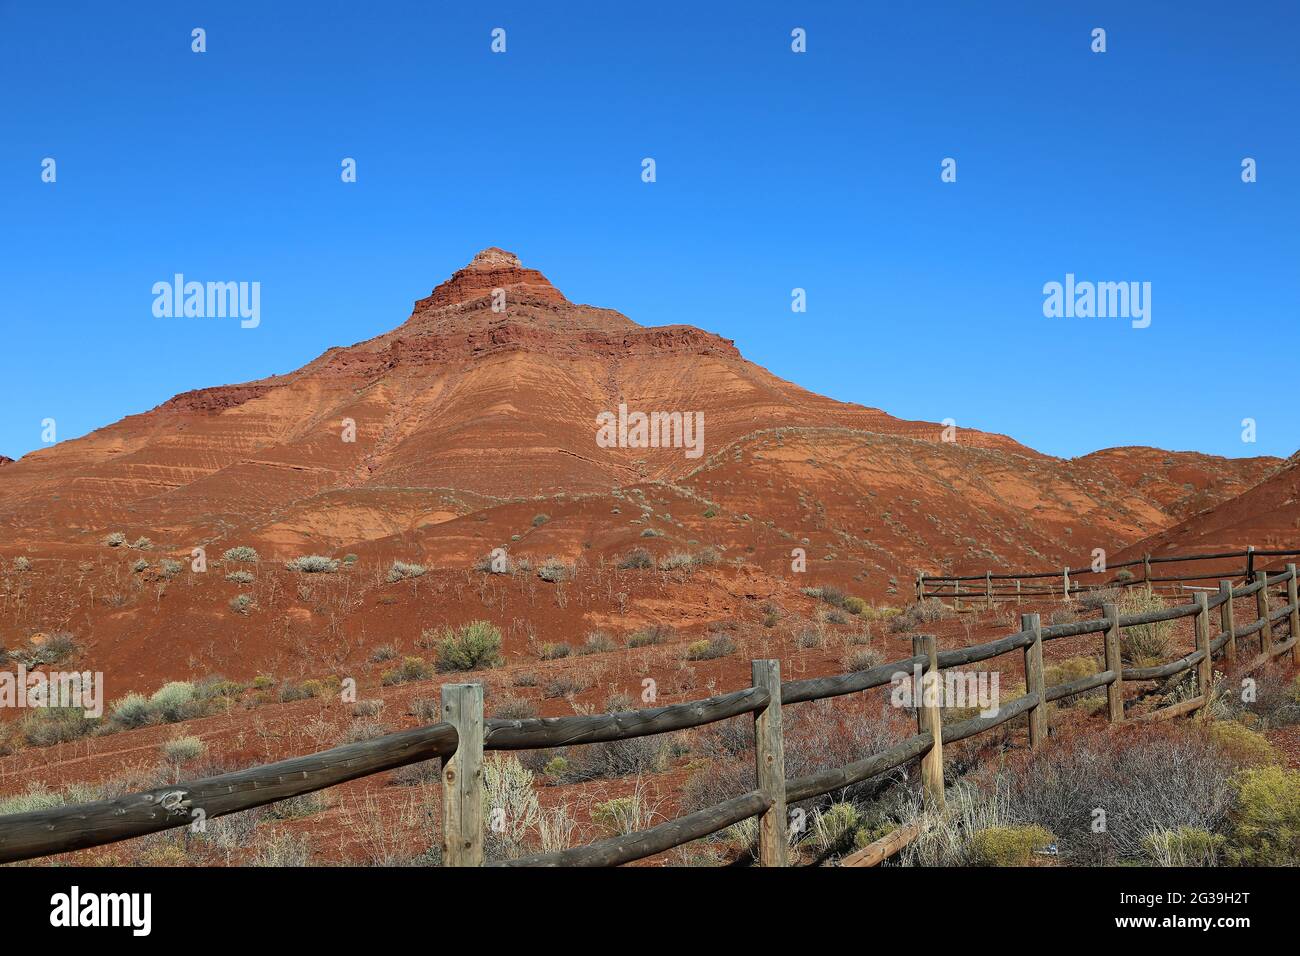 Wooden fence and red monument - Castle Valley - Utah Stock Photo